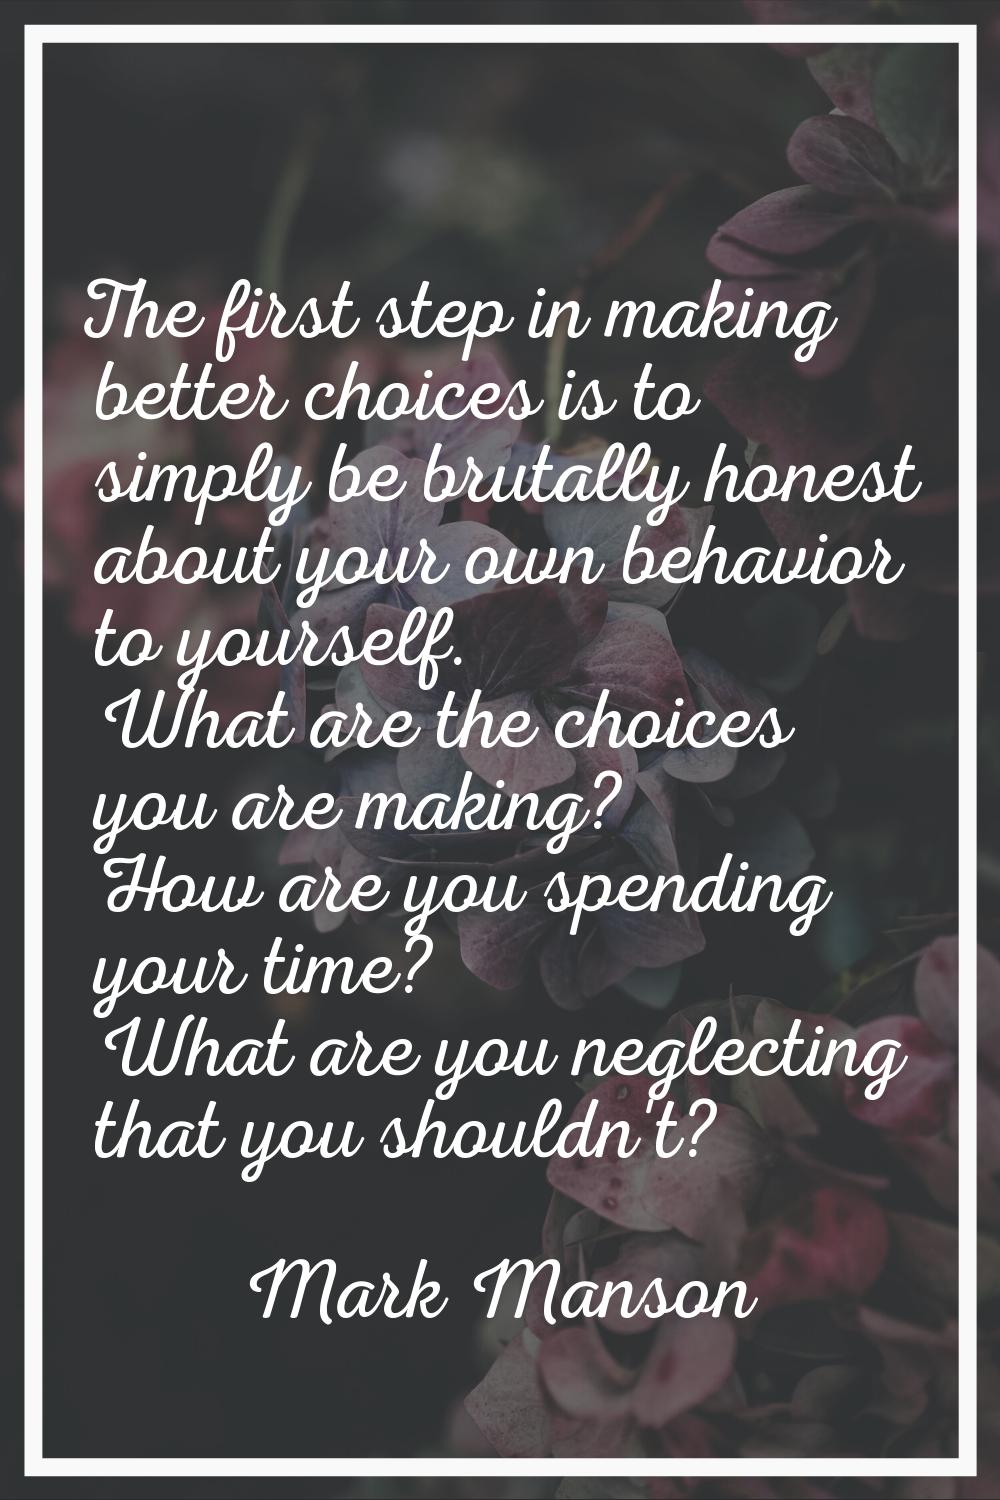 The first step in making better choices is to simply be brutally honest about your own behavior to 